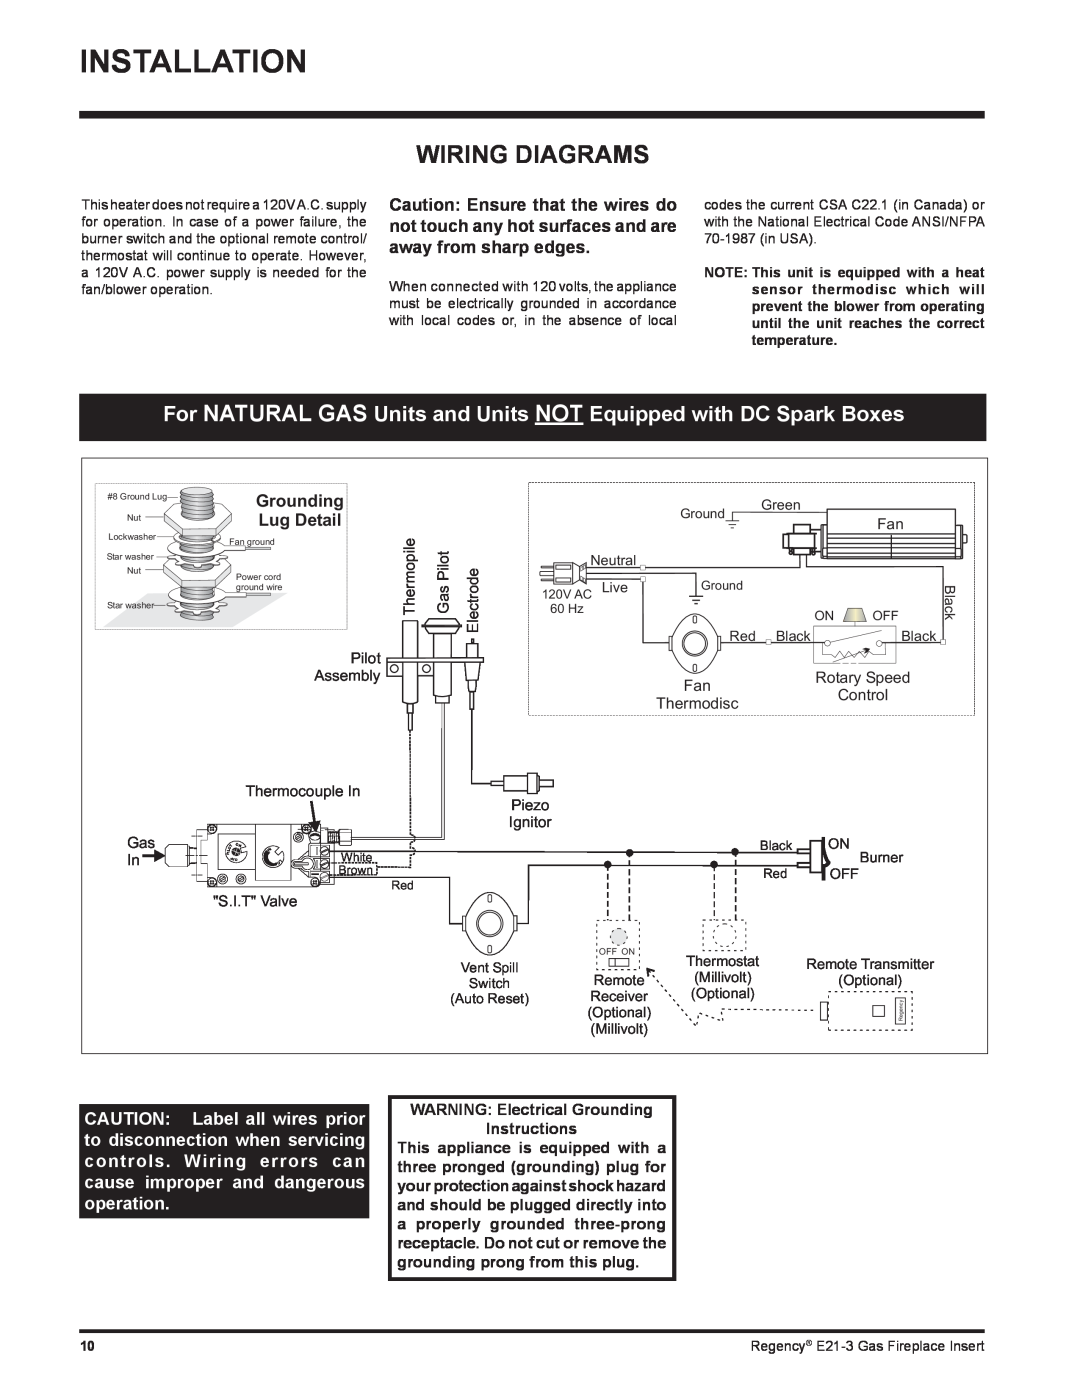 Regency E21-NG3, E21-LP3 Installation, Wiring Diagrams, Lug Detail, WARNING Electrical Grounding Instructions 